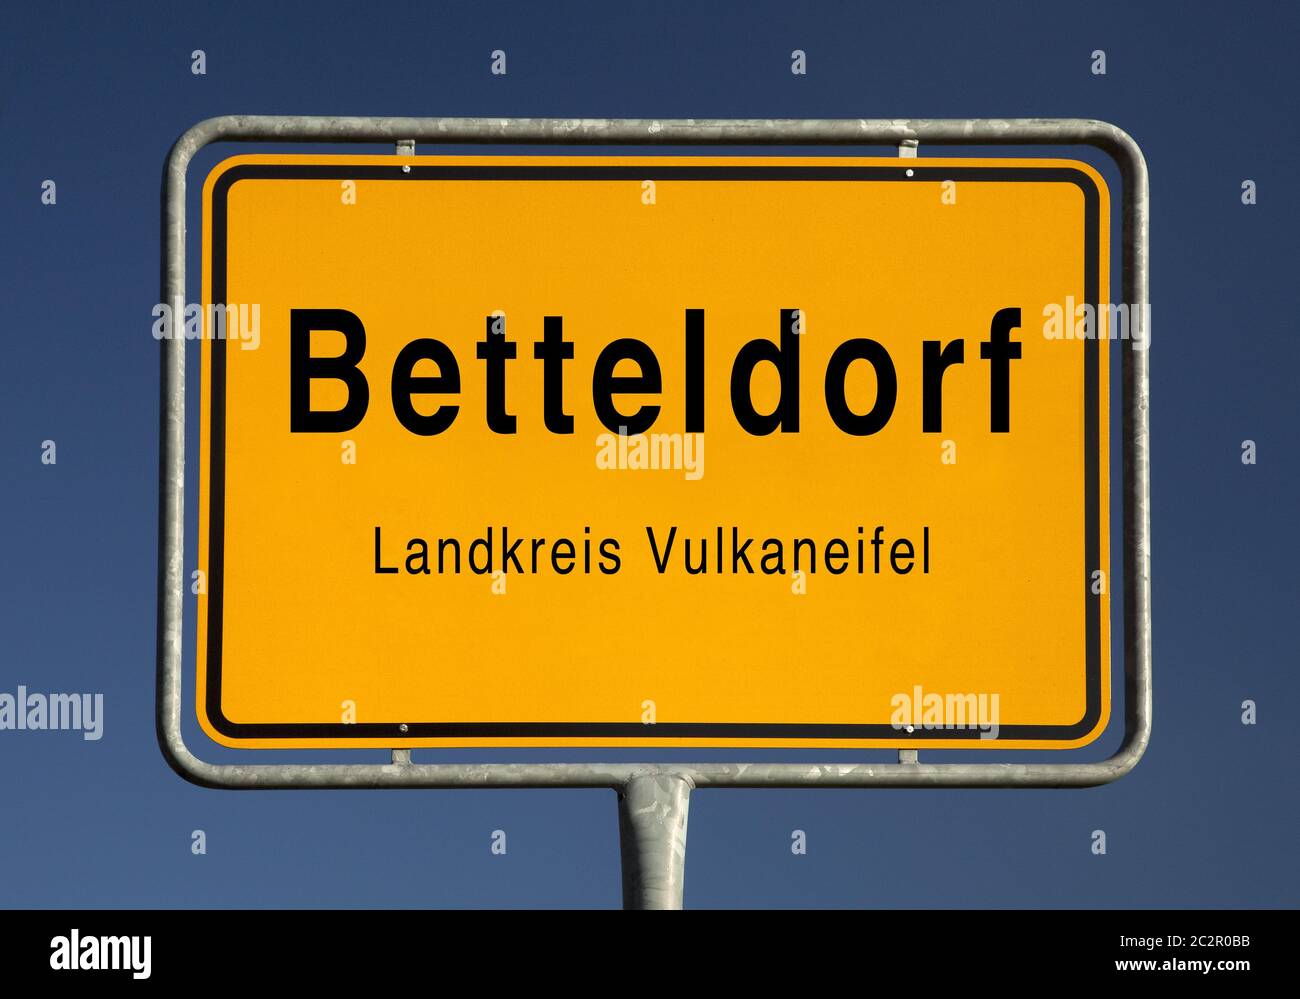 city entrance sign of Betteldorf, local community in the district Vulkaneifel, Germany, Europe Stock Photo